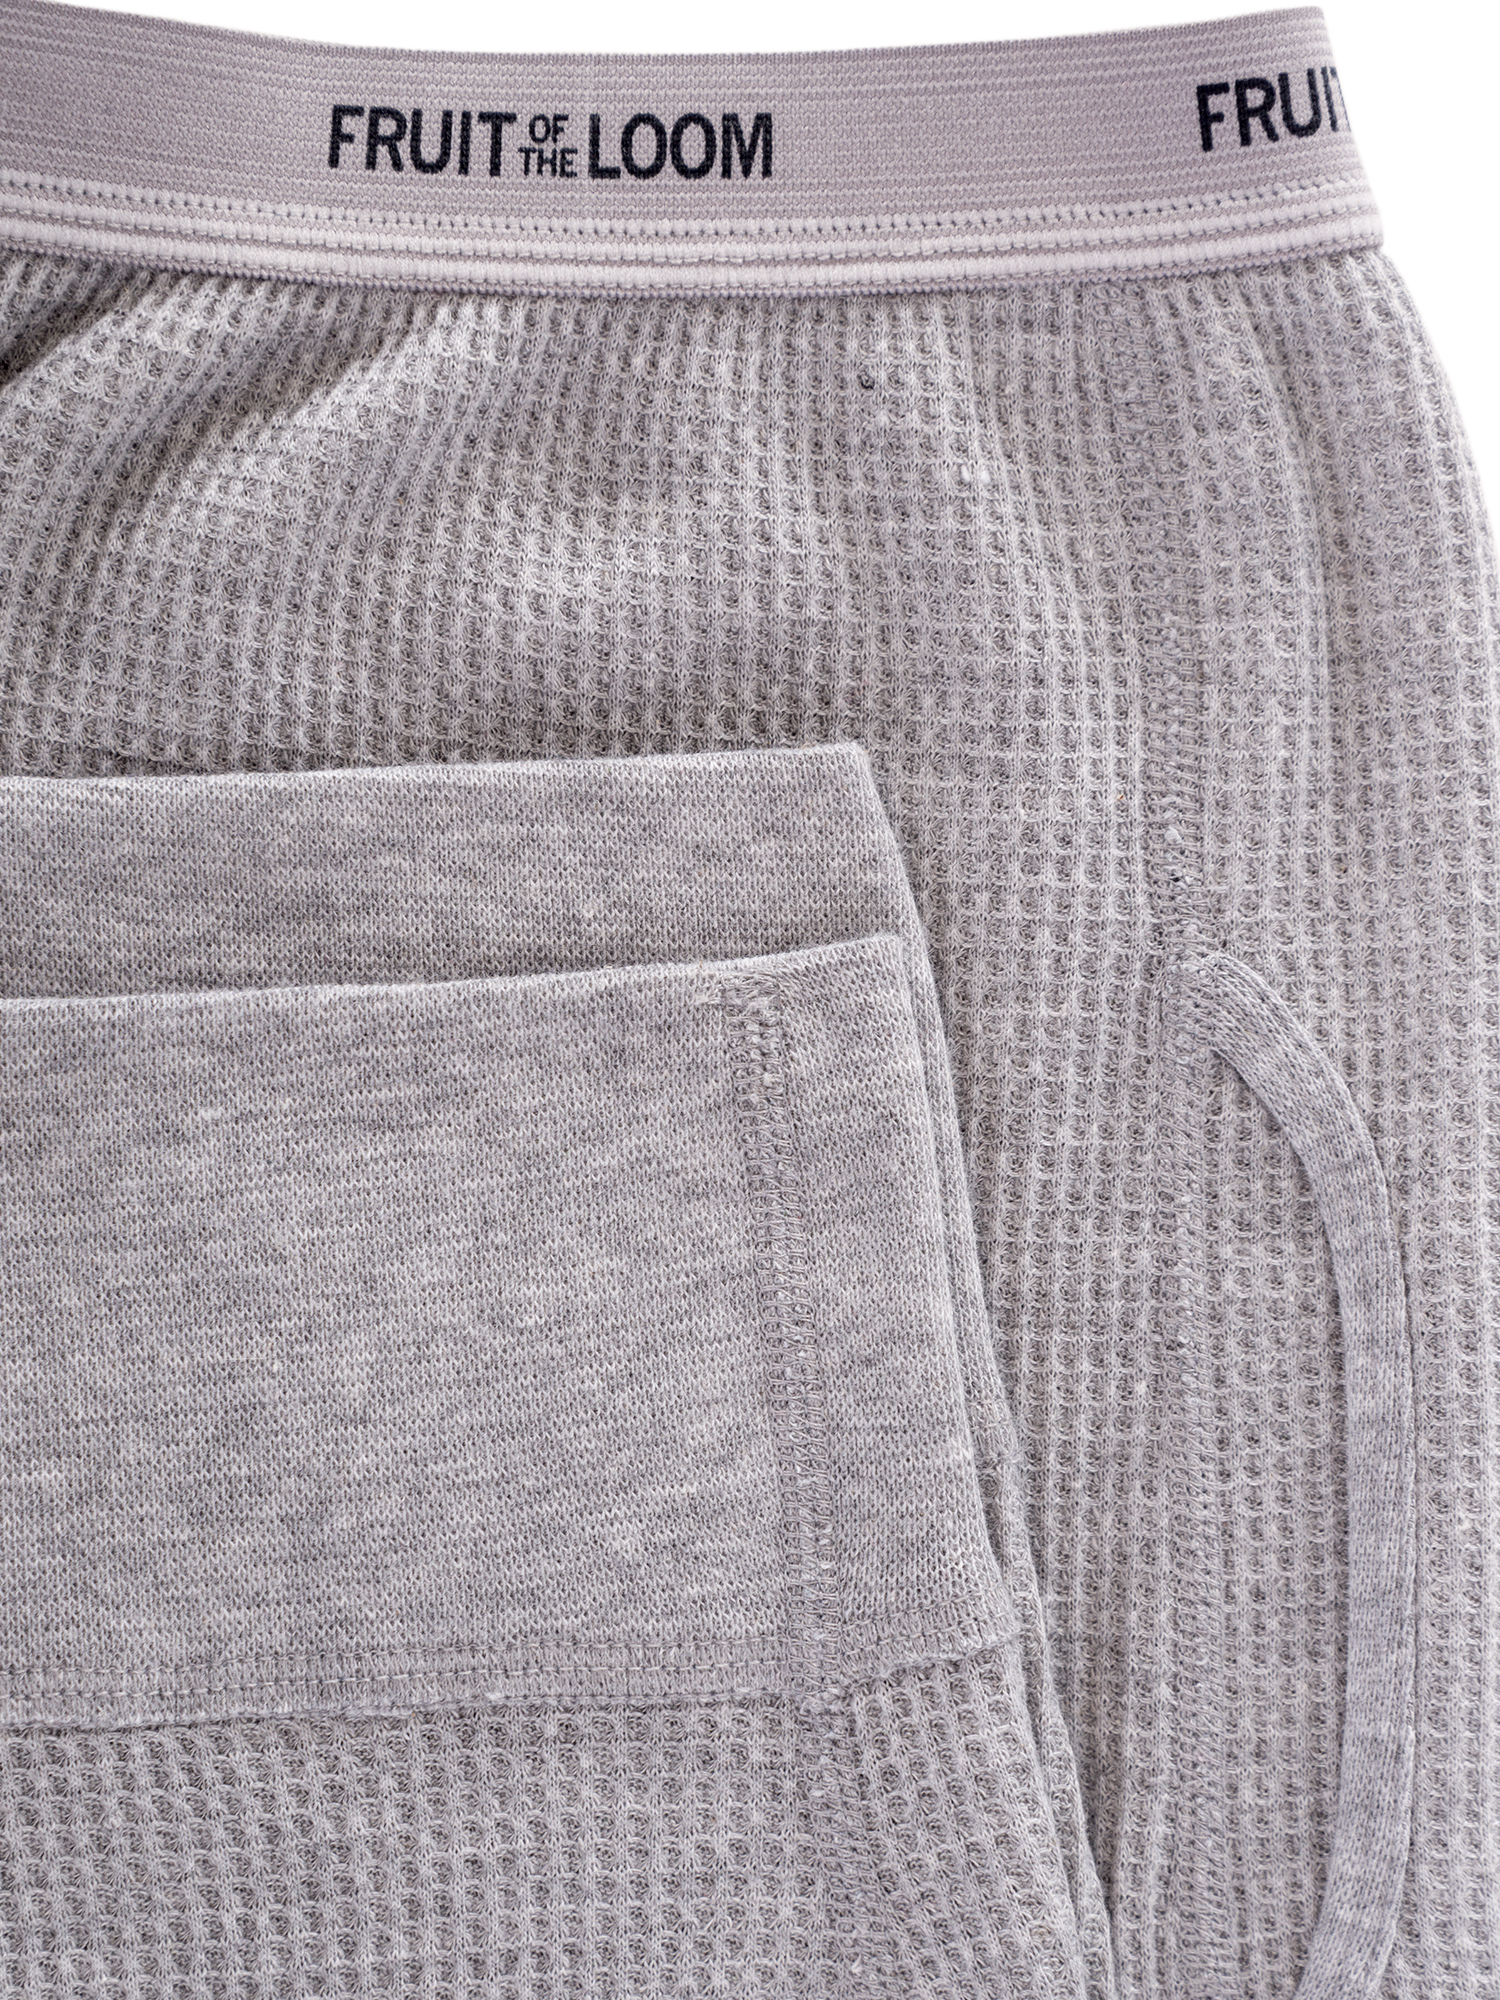 Fruit of the Loom Men's Thermal Waffle Baselayer Underwear Pant - image 3 of 5